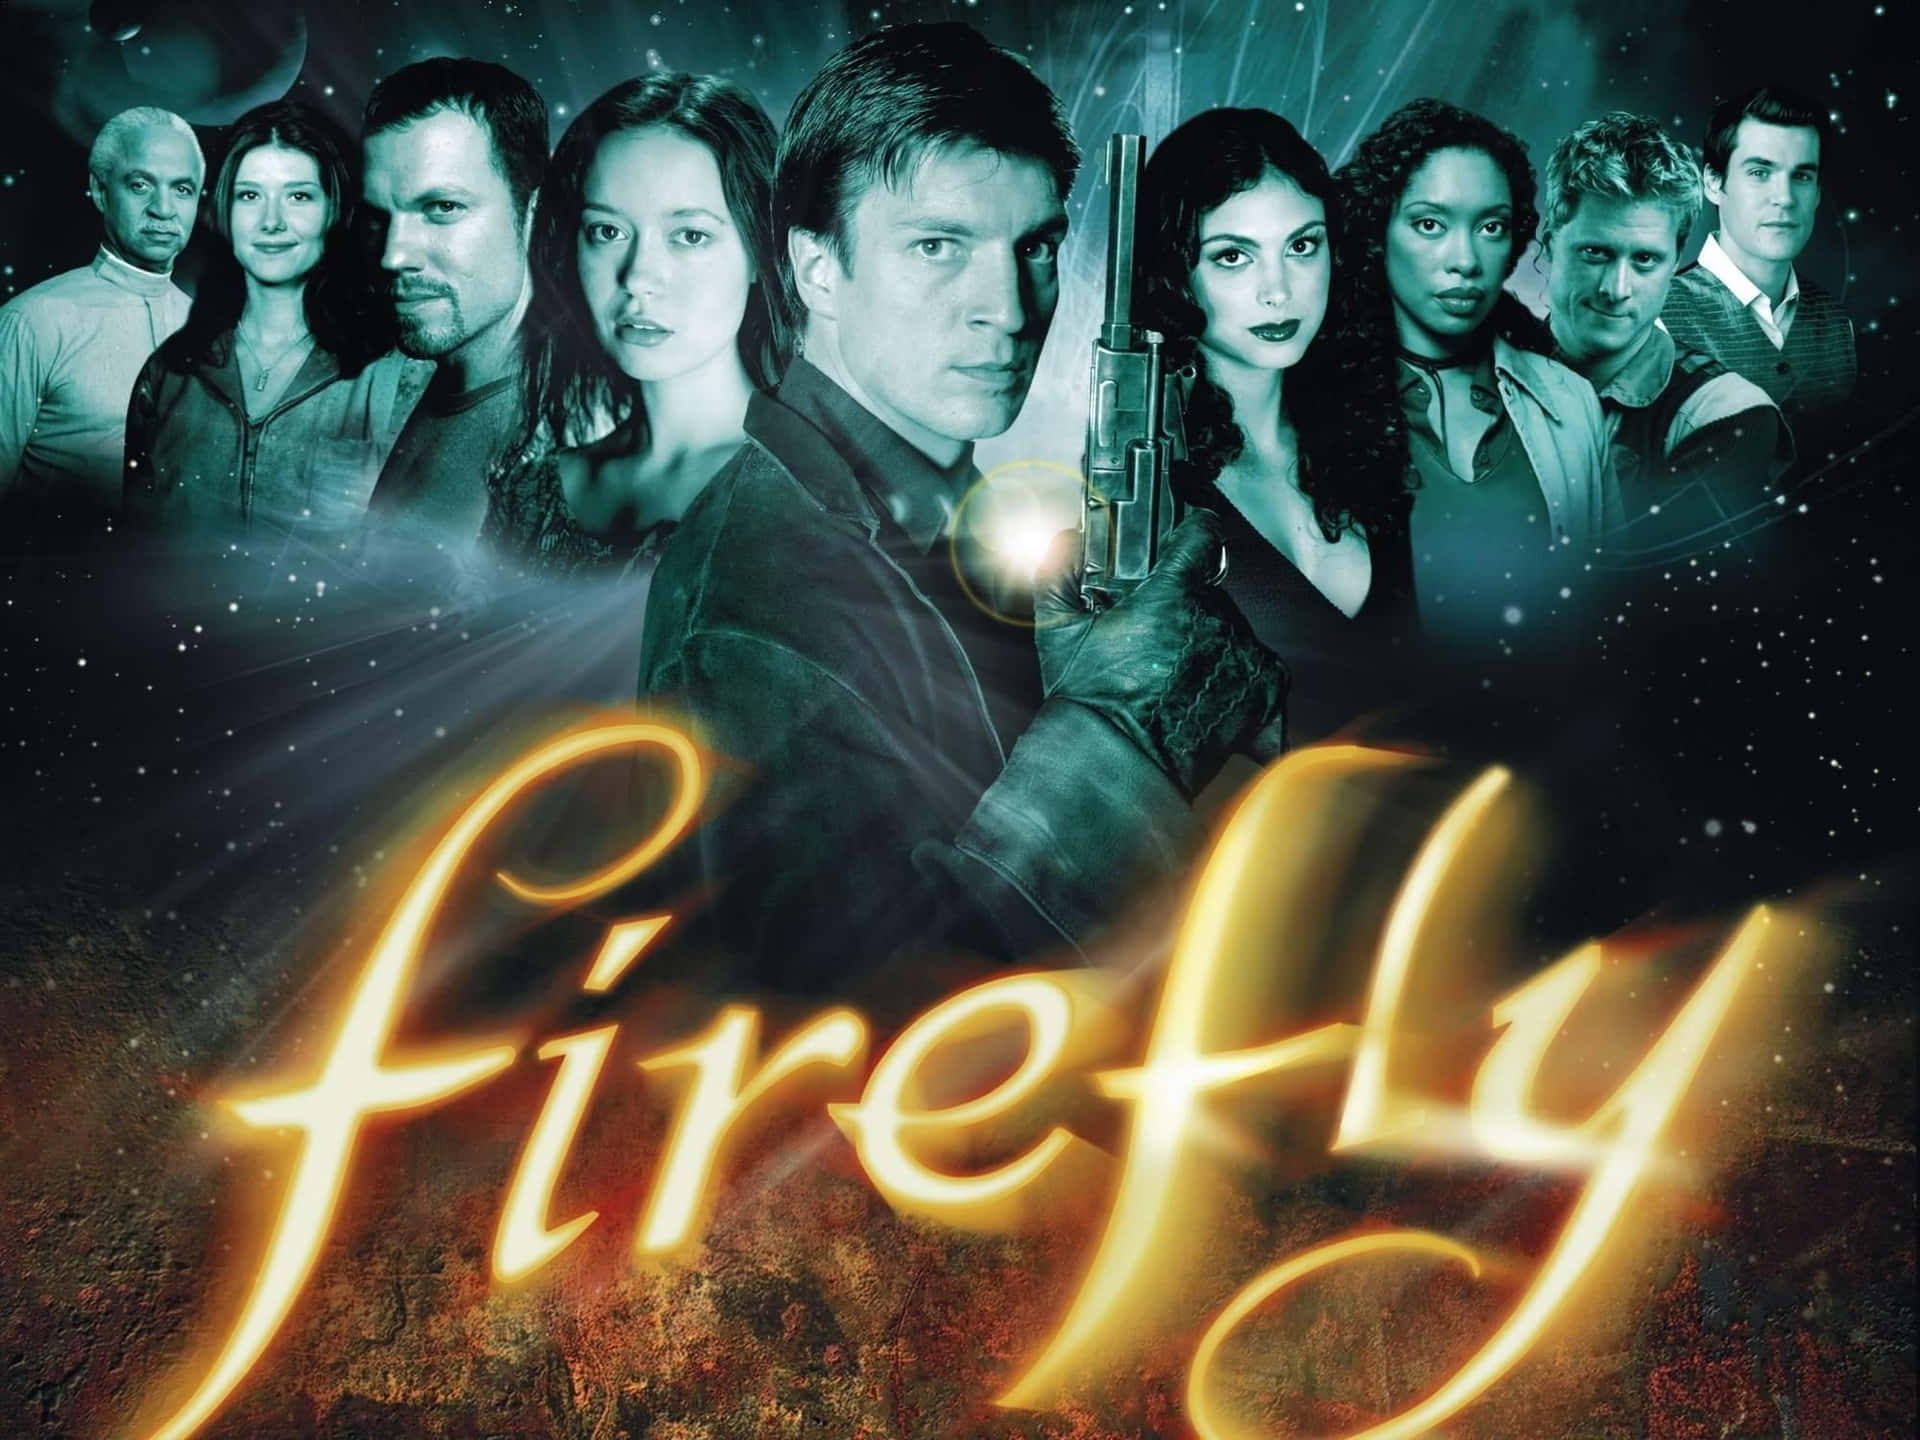 The crew of the spacecraft Serenity seen in the science fiction television show Firefly Wallpaper